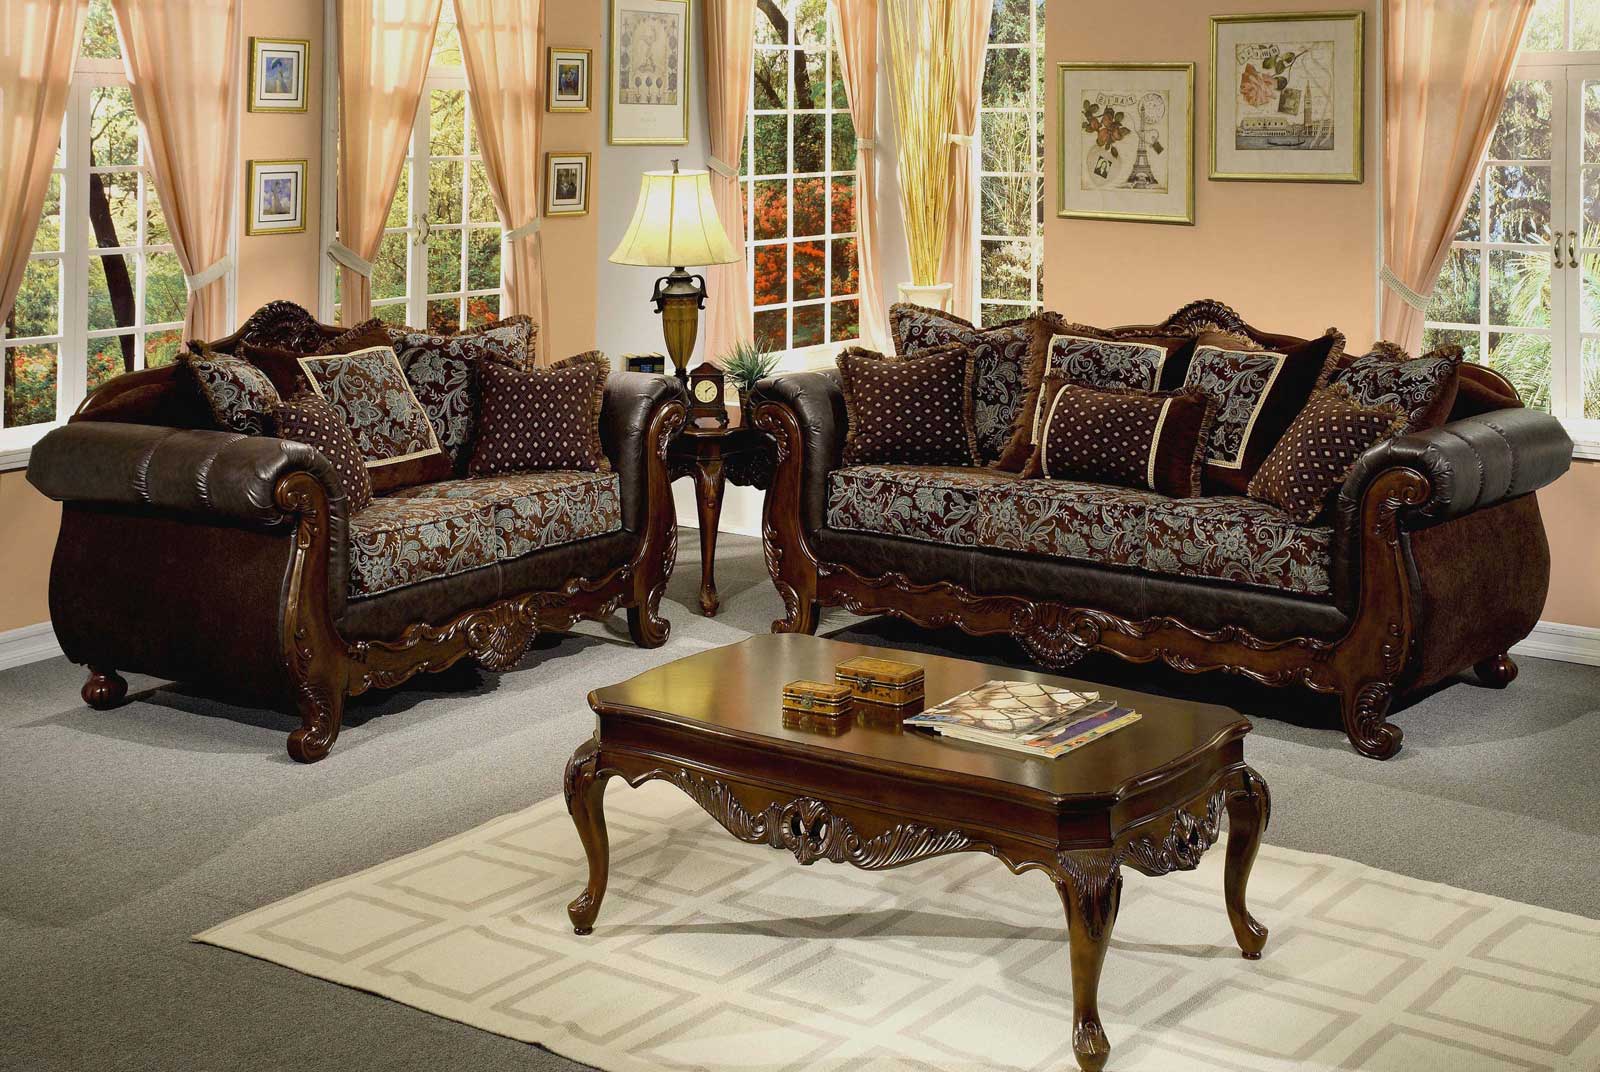 Living Room With Astonishing Living Room Furniture Sets With Elegant Dark Brown Sofas Completed By Cushions Also Furnished With Wooden Table On Rug And Table Lamp On Nightstand Furniture The Best Living Room Furniture Sets